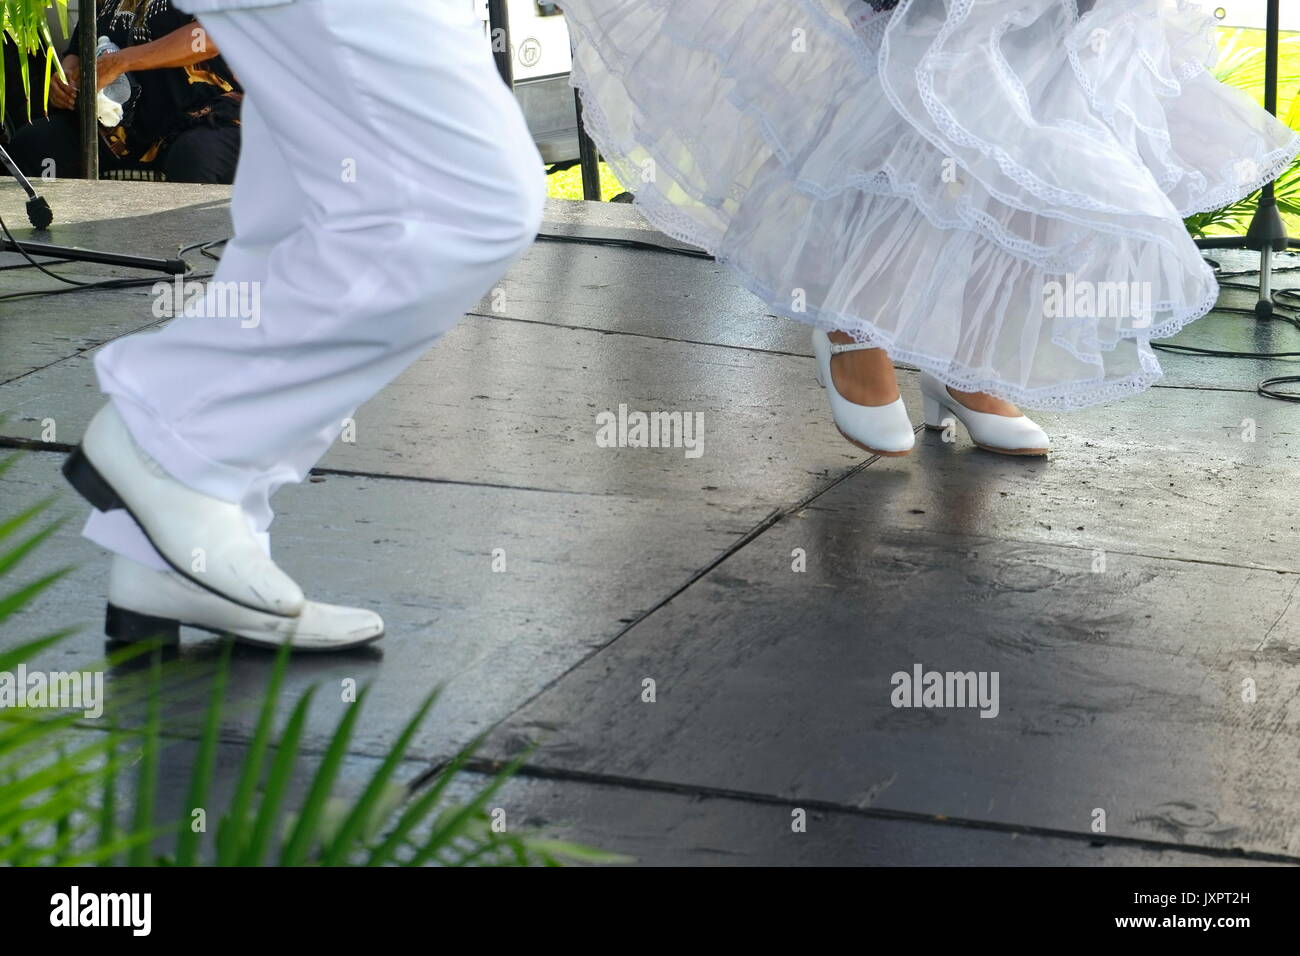 mexican dance shoes